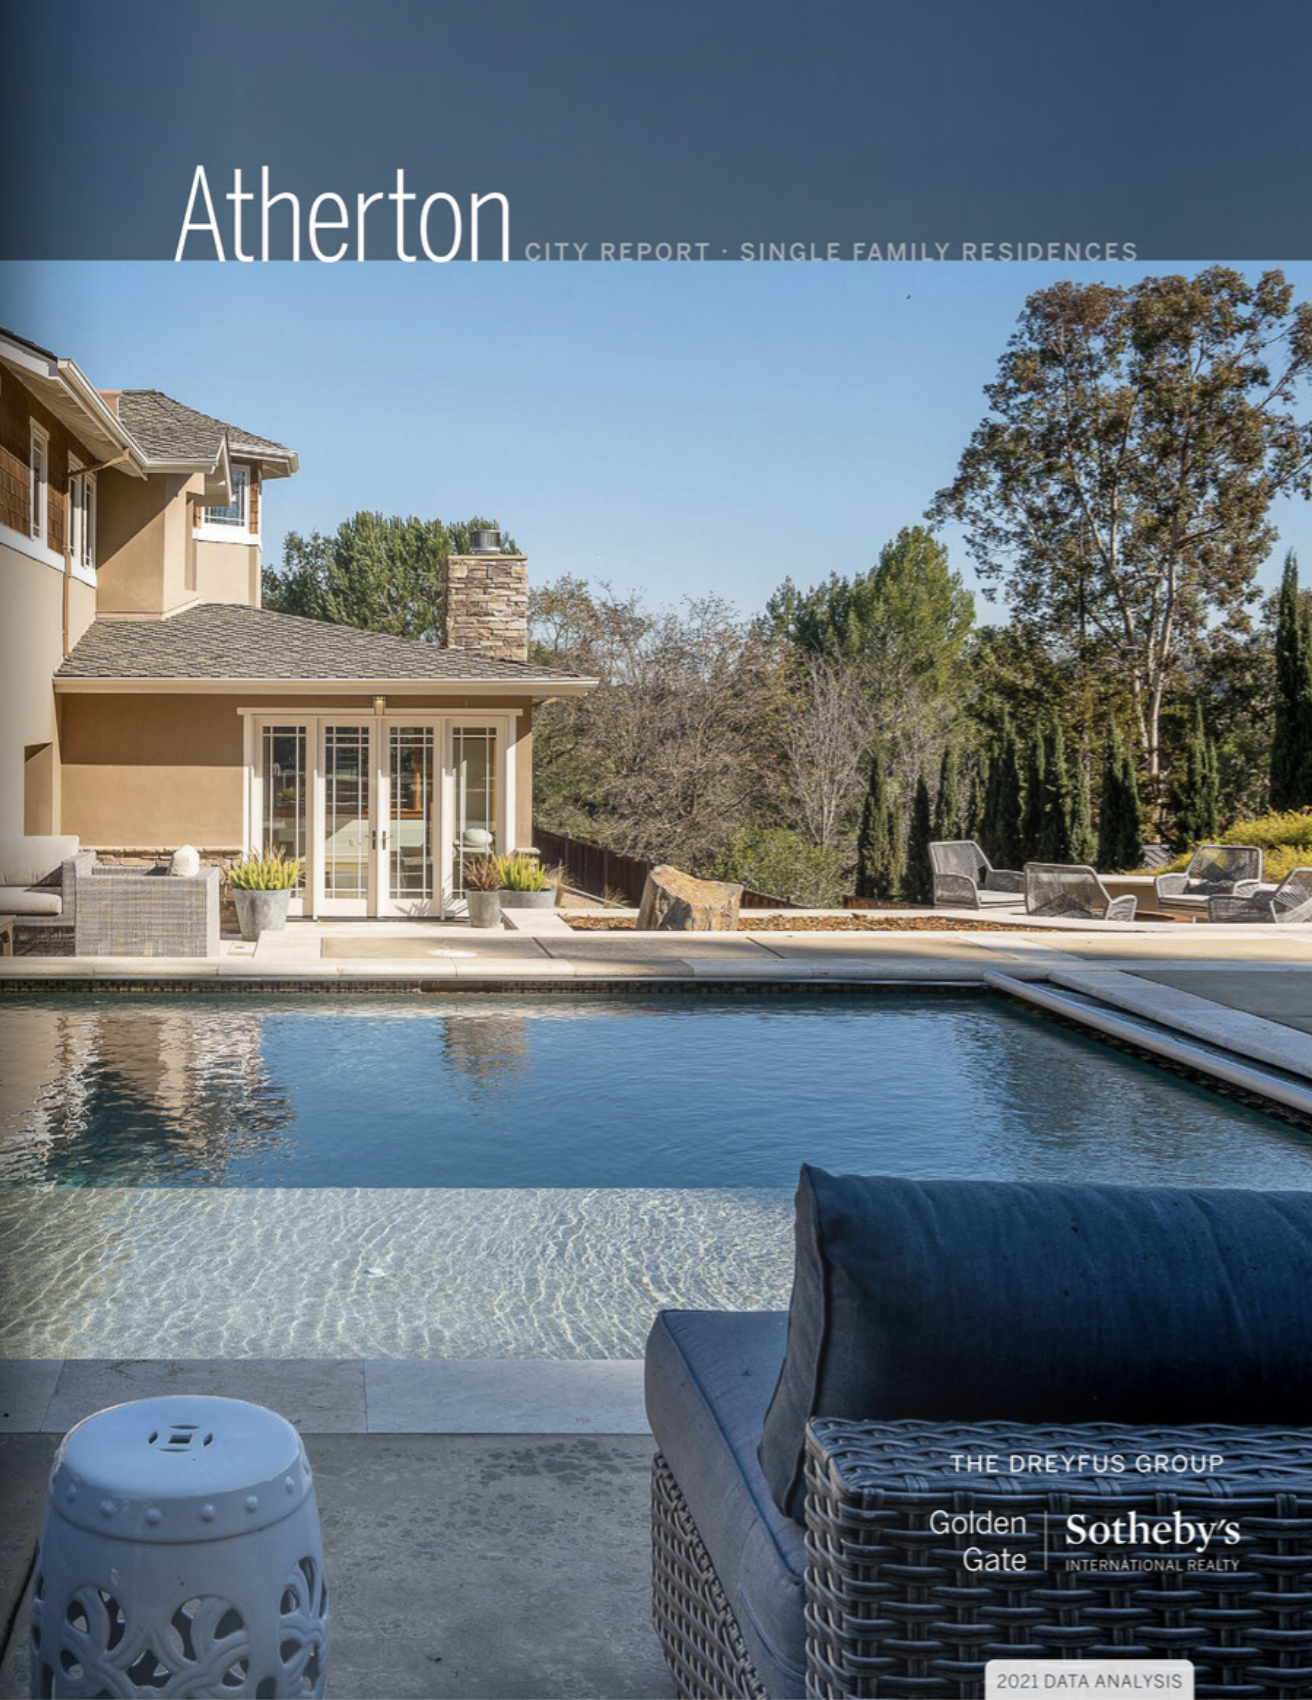 City Report - Atherton - Cover.png